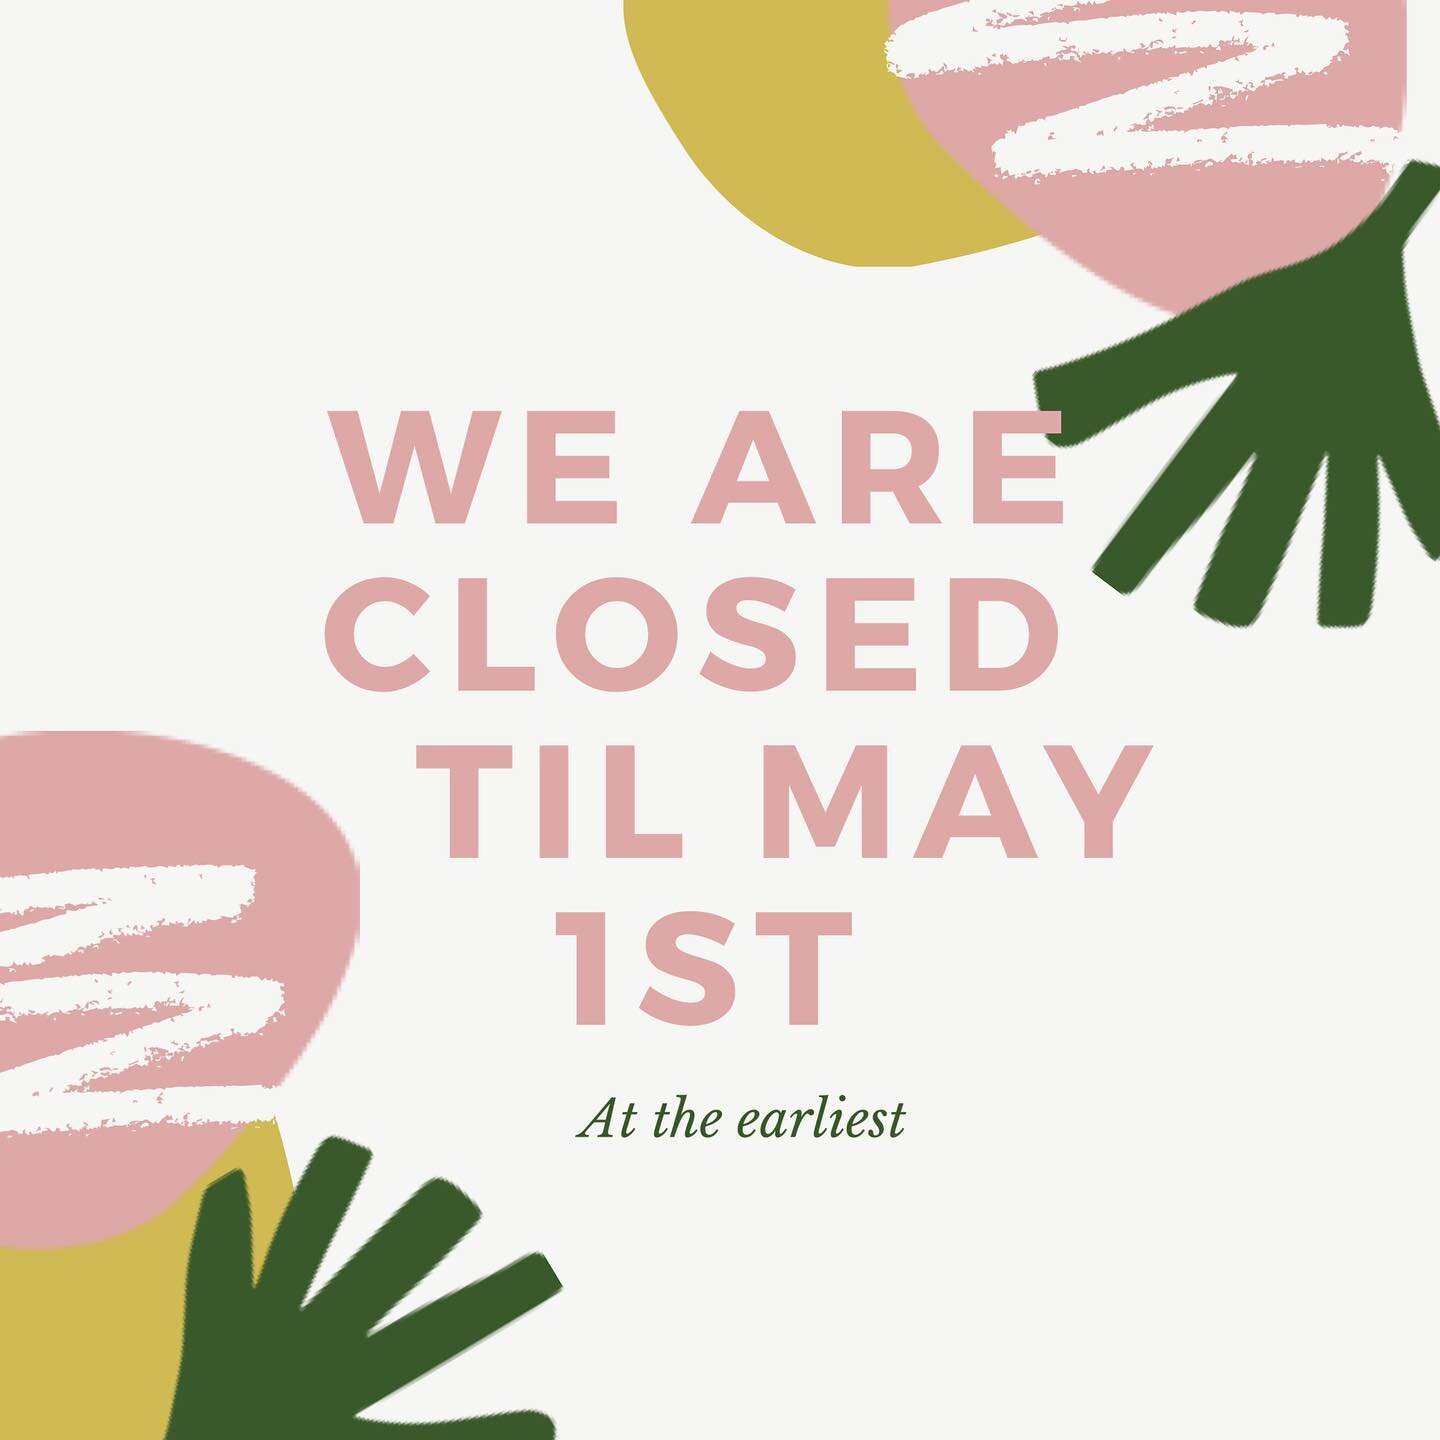 We will be extending our closure until May 1st (at the earliest).
If you have a scheduled appointment on our books between now and April 30th, we will be reaching out to you to rescheduled as we get closer to our re open date.
Looking forward to seei